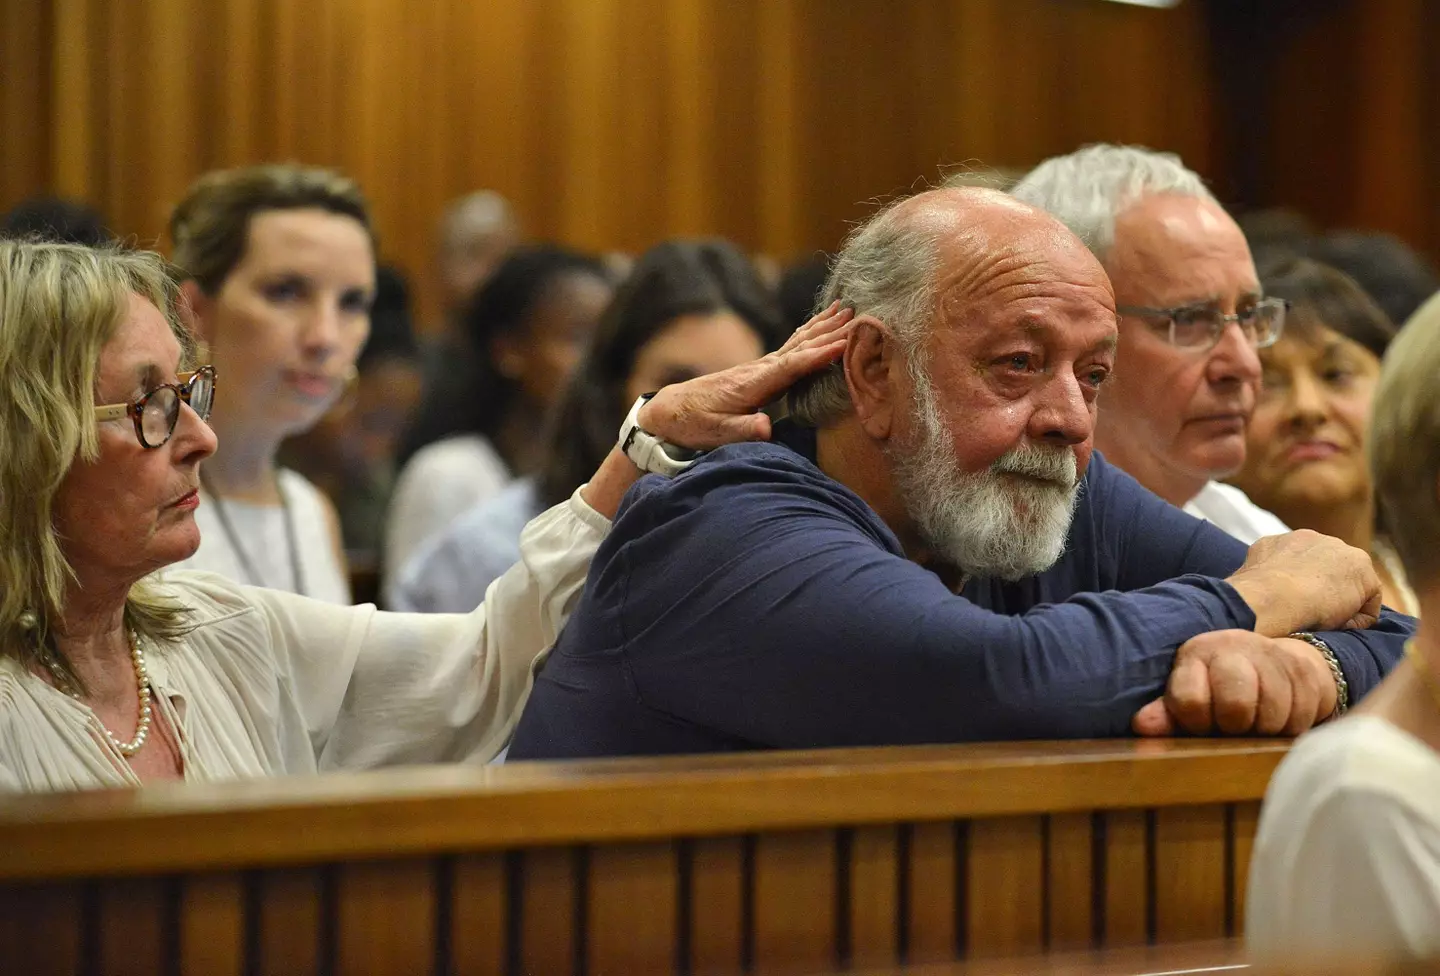 Reeva Steenkamp's parents Barry and June will be allowed to address the parole board.